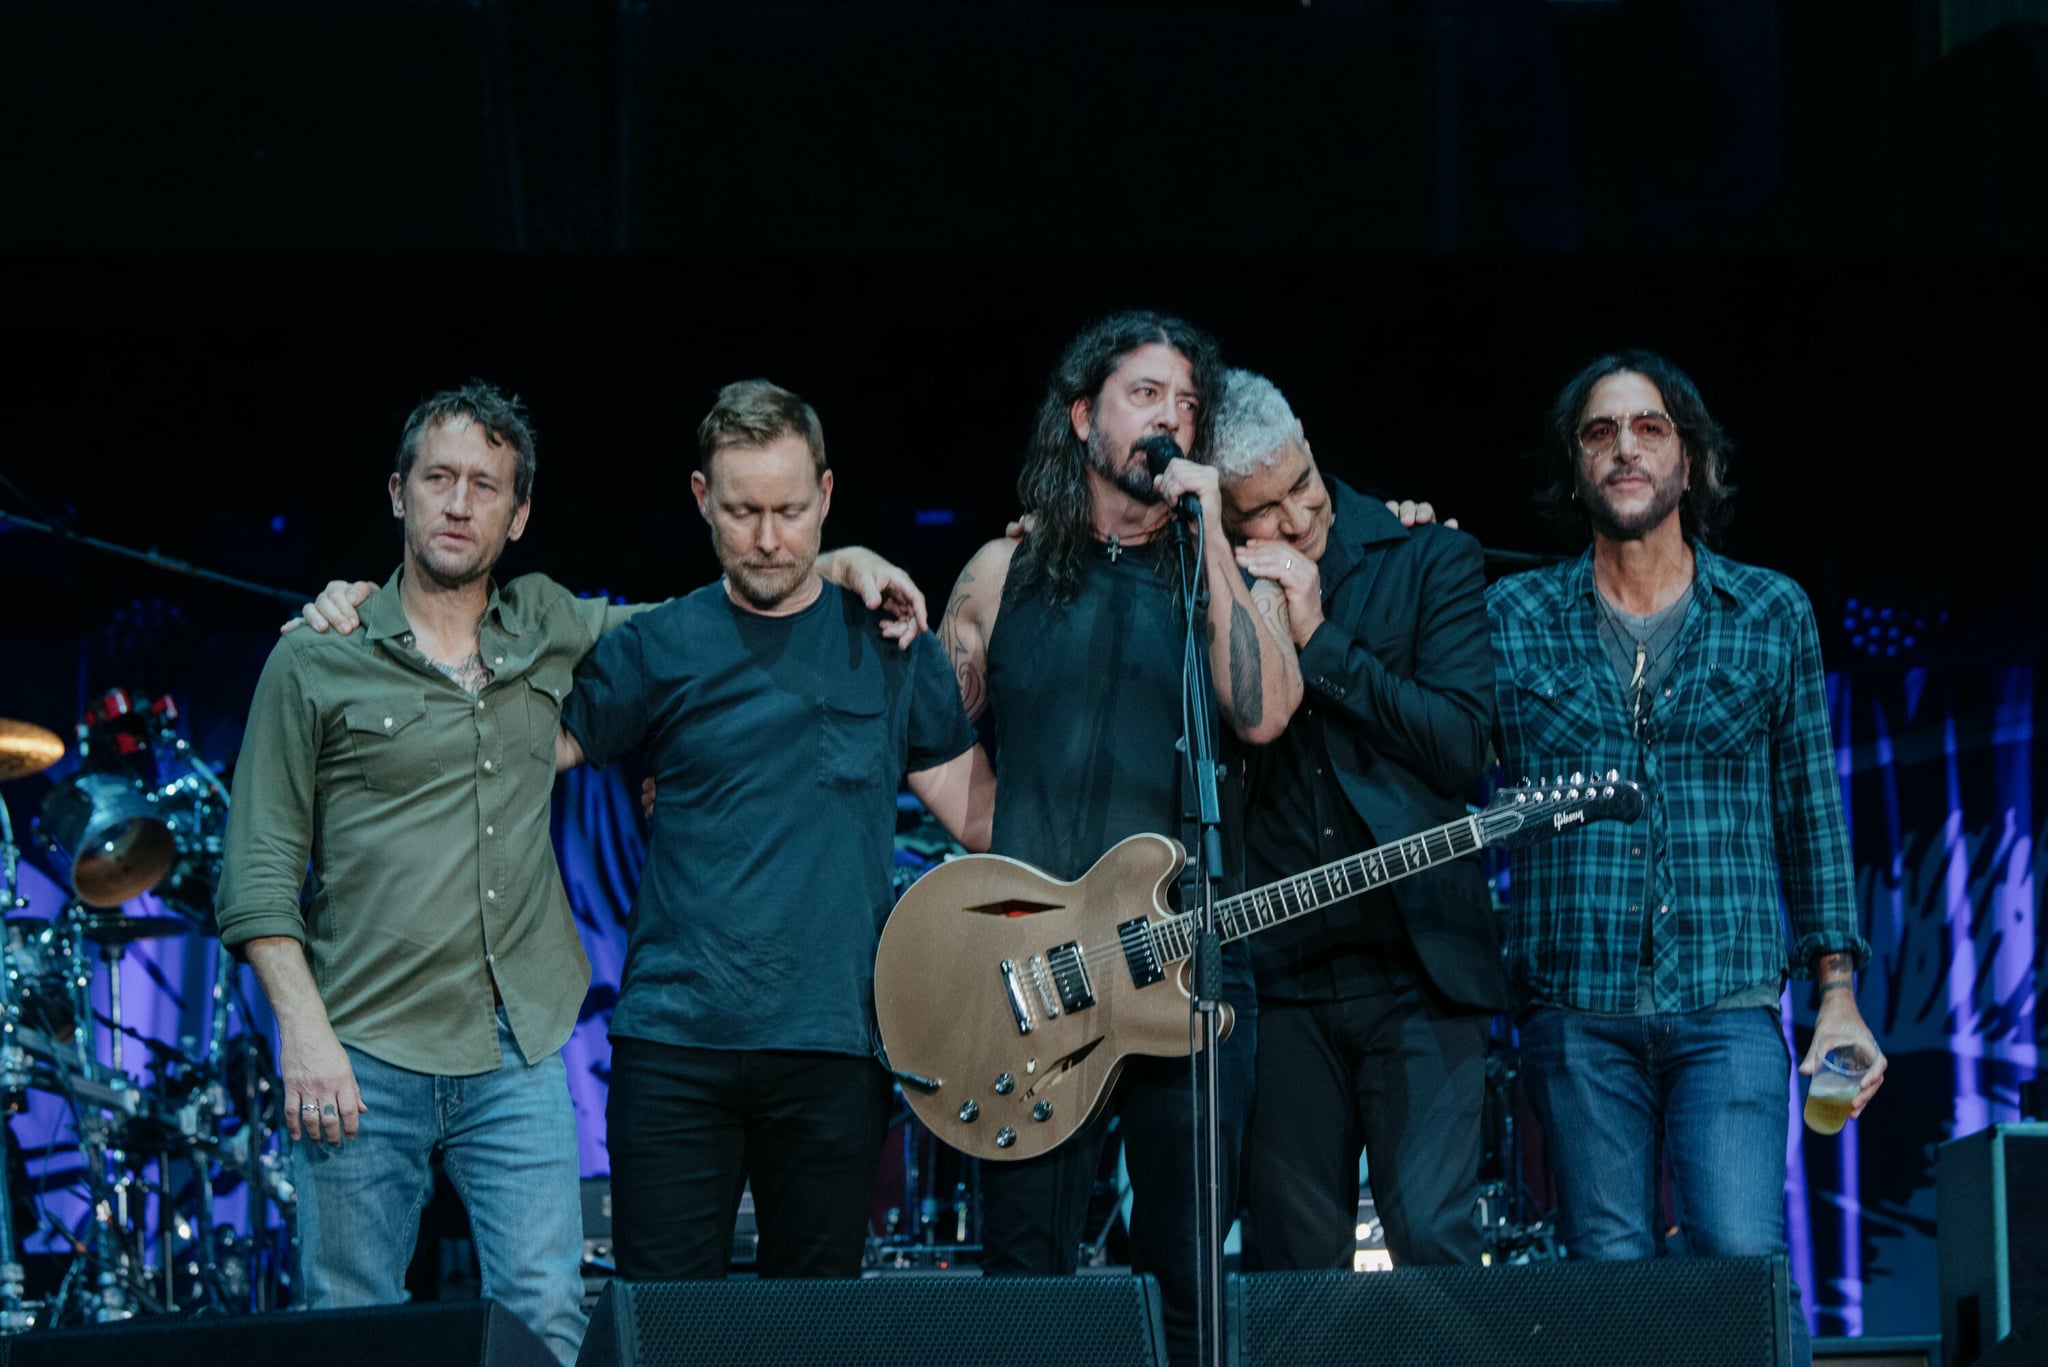 Foo Fighters at The Taylor Hawkins Tribute Concert at Wembley Stadium in London, Sept. 3, 2022. Photo Credit: Oliver Halfin ©2022 All Rights Reserved